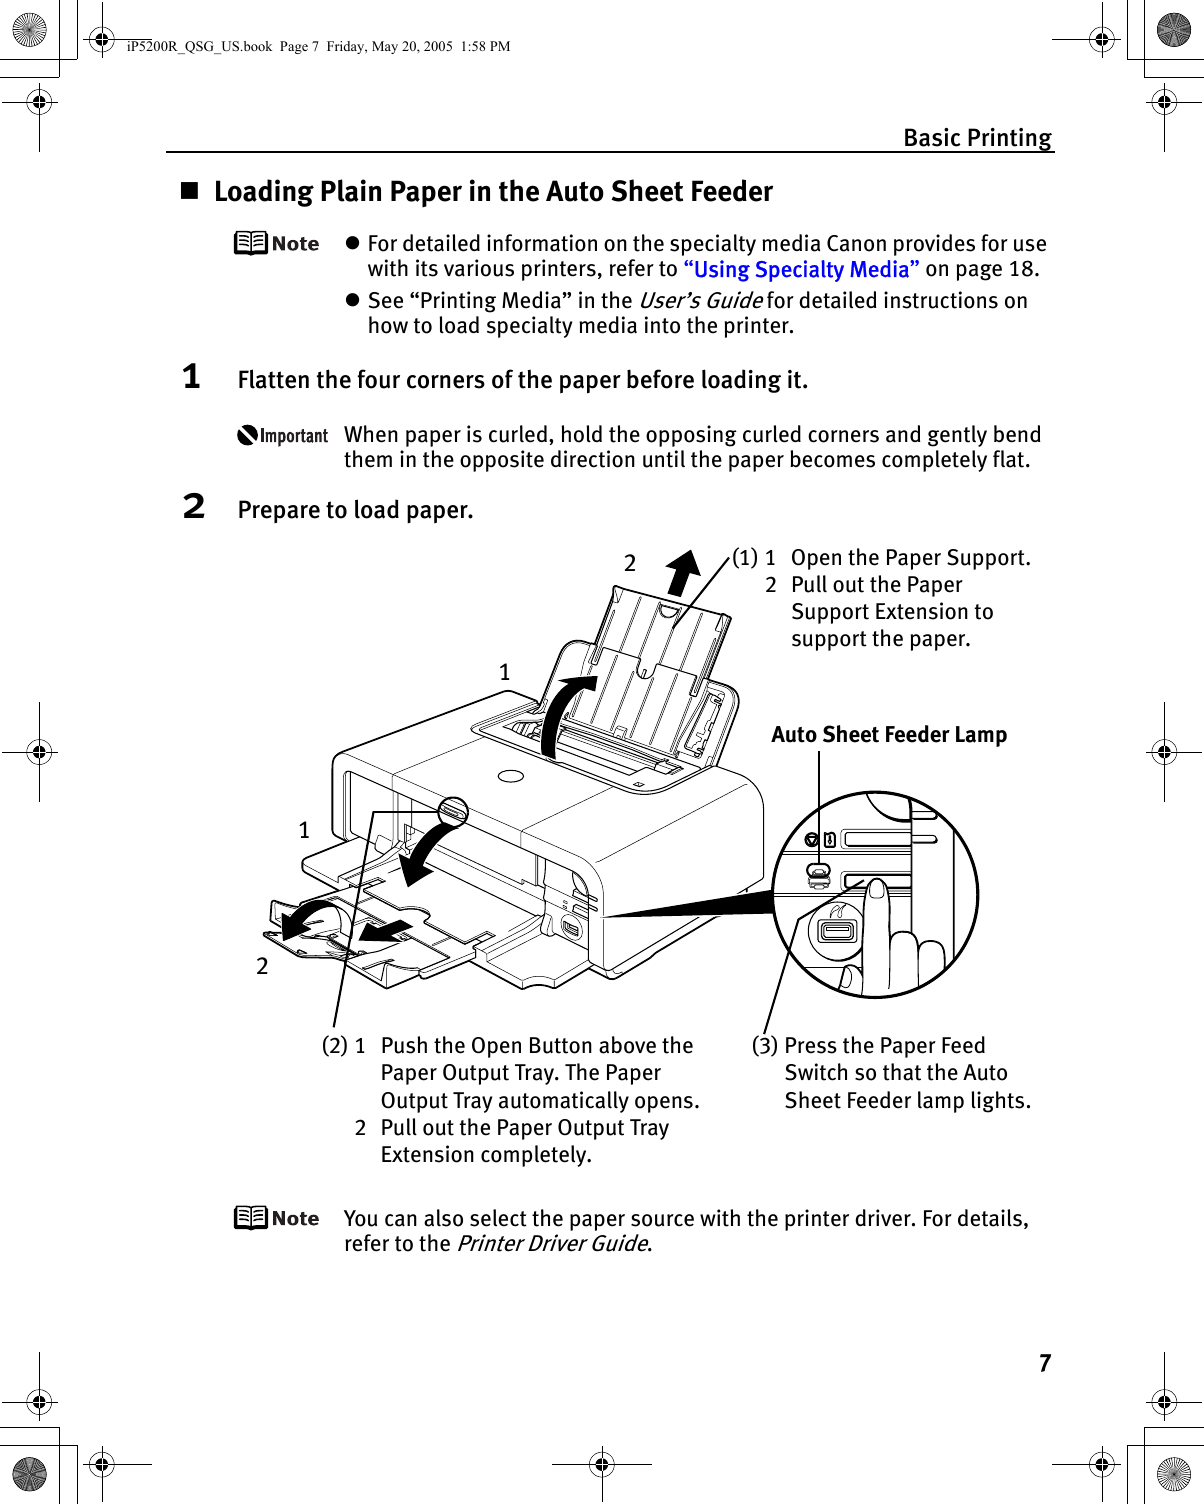 Basic Printing7Loading Plain Paper in the Auto Sheet FeederzFor detailed information on the specialty media Canon provides for use with its various printers, refer to “Using Specialty Media” on page 18.zSee “Printing Media” in the User’s Guide for detailed instructions on how to load specialty media into the printer.1Flatten the four corners of the paper before loading it.When paper is curled, hold the opposing curled corners and gently bend them in the opposite direction until the paper becomes completely flat.2Prepare to load paper.You can also select the paper source with the printer driver. For details, refer to the Printer Driver Guide.(1) 1 Open the Paper Support.2 Pull out the Paper Support Extension to support the paper.(2) 1 Push the Open Button above the Paper Output Tray. The Paper Output Tray automatically opens.2 Pull out the Paper Output Tray Extension completely.(3) Press the Paper Feed Switch so that the Auto Sheet Feeder lamp lights.Auto Sheet Feeder Lamp1122iP5200R_QSG_US.book  Page 7  Friday, May 20, 2005  1:58 PM